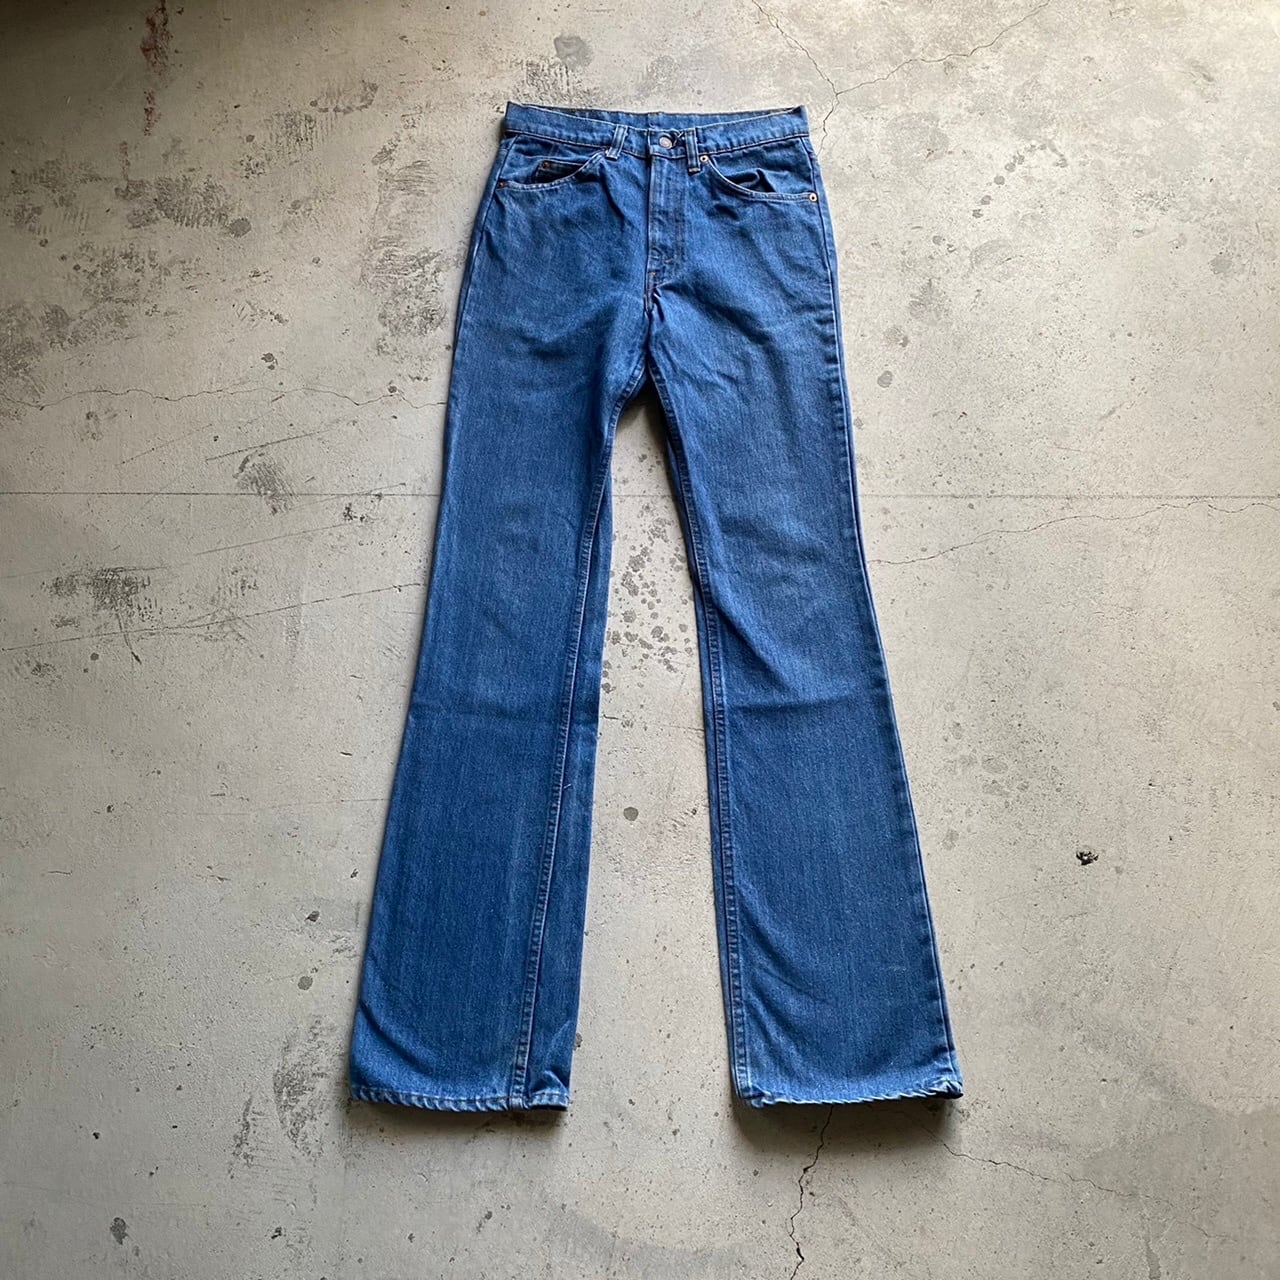 USED 古着　Levi's 80年代　リーバイス　517　ブーツカットジーンズ　W31 USA製　アメリカ製　ヴィンテージ | magazines  webshop powered by BASE